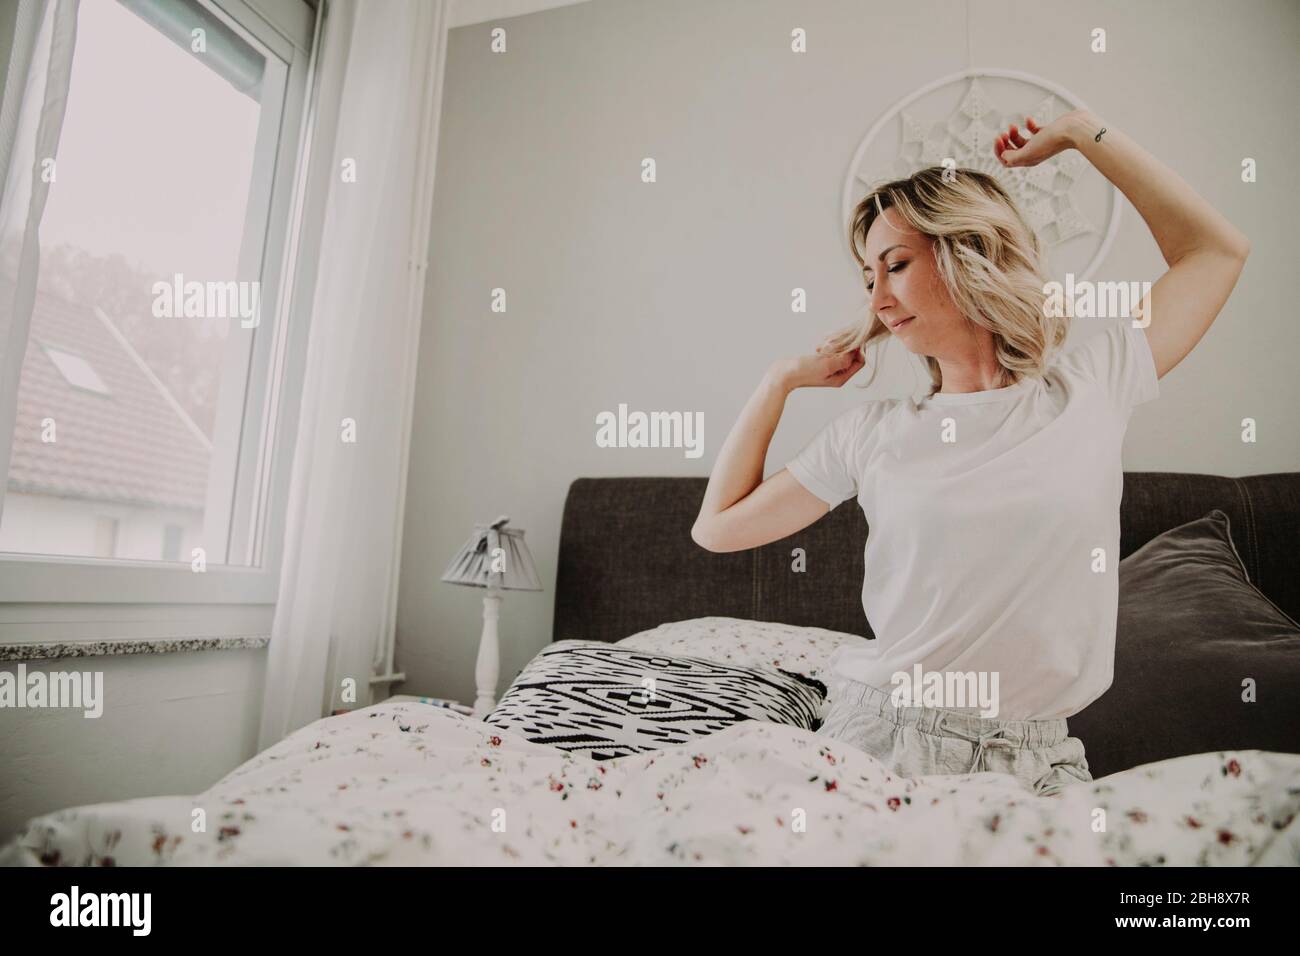 Woman sits in bed and stretches Stock Photo